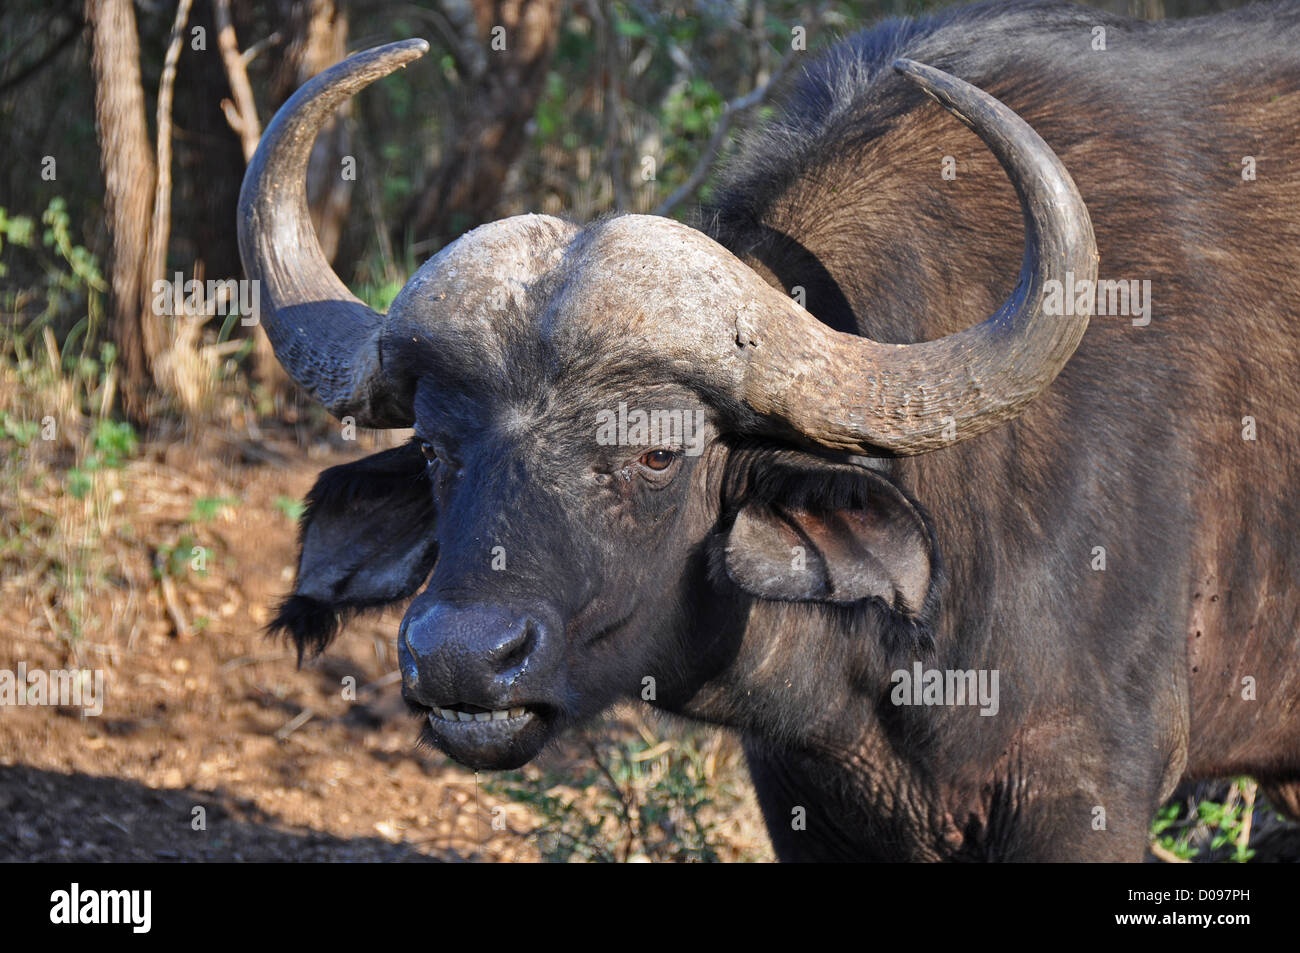 Buffalo in South Africa Stock Photo